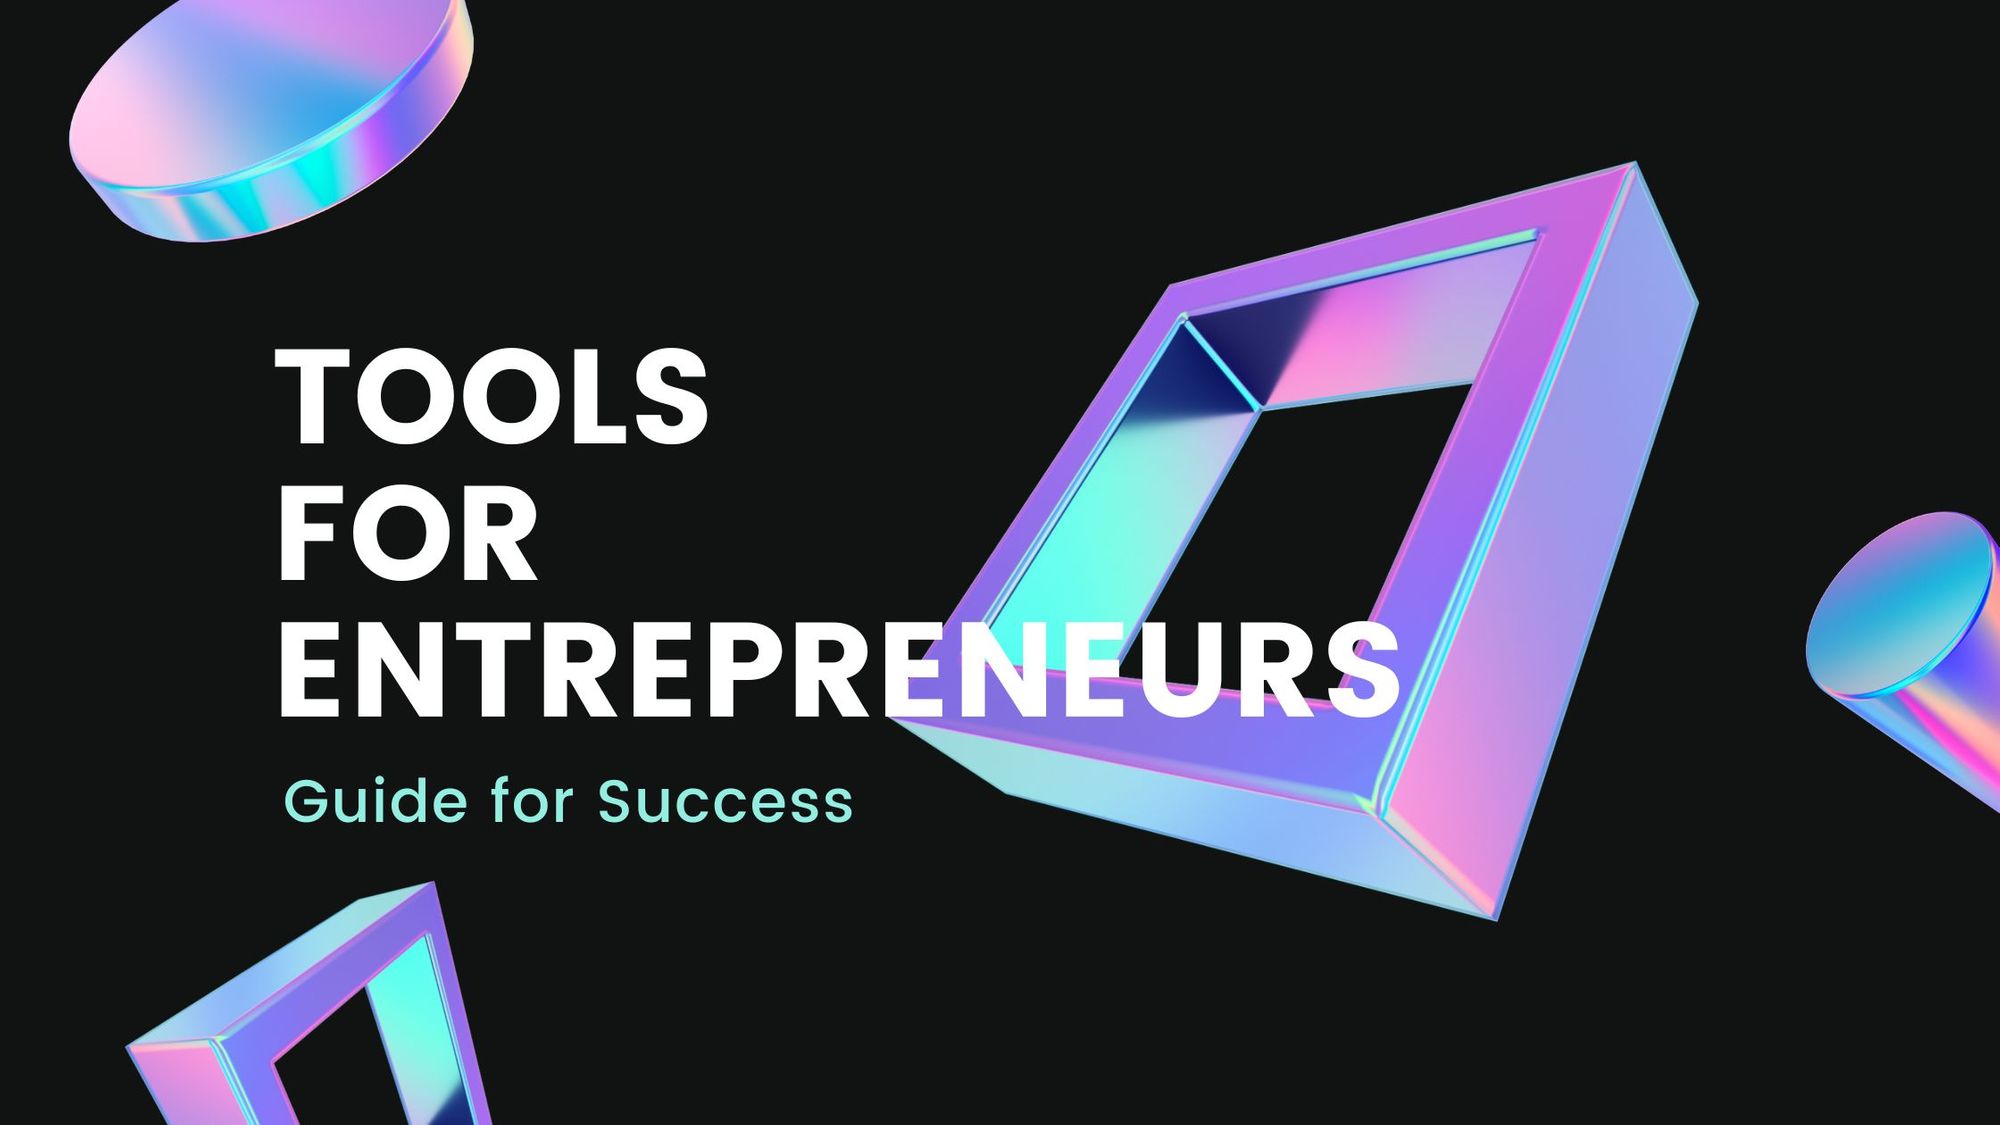 Best Software Tools to Cultivate the Entrepreneur Mindset